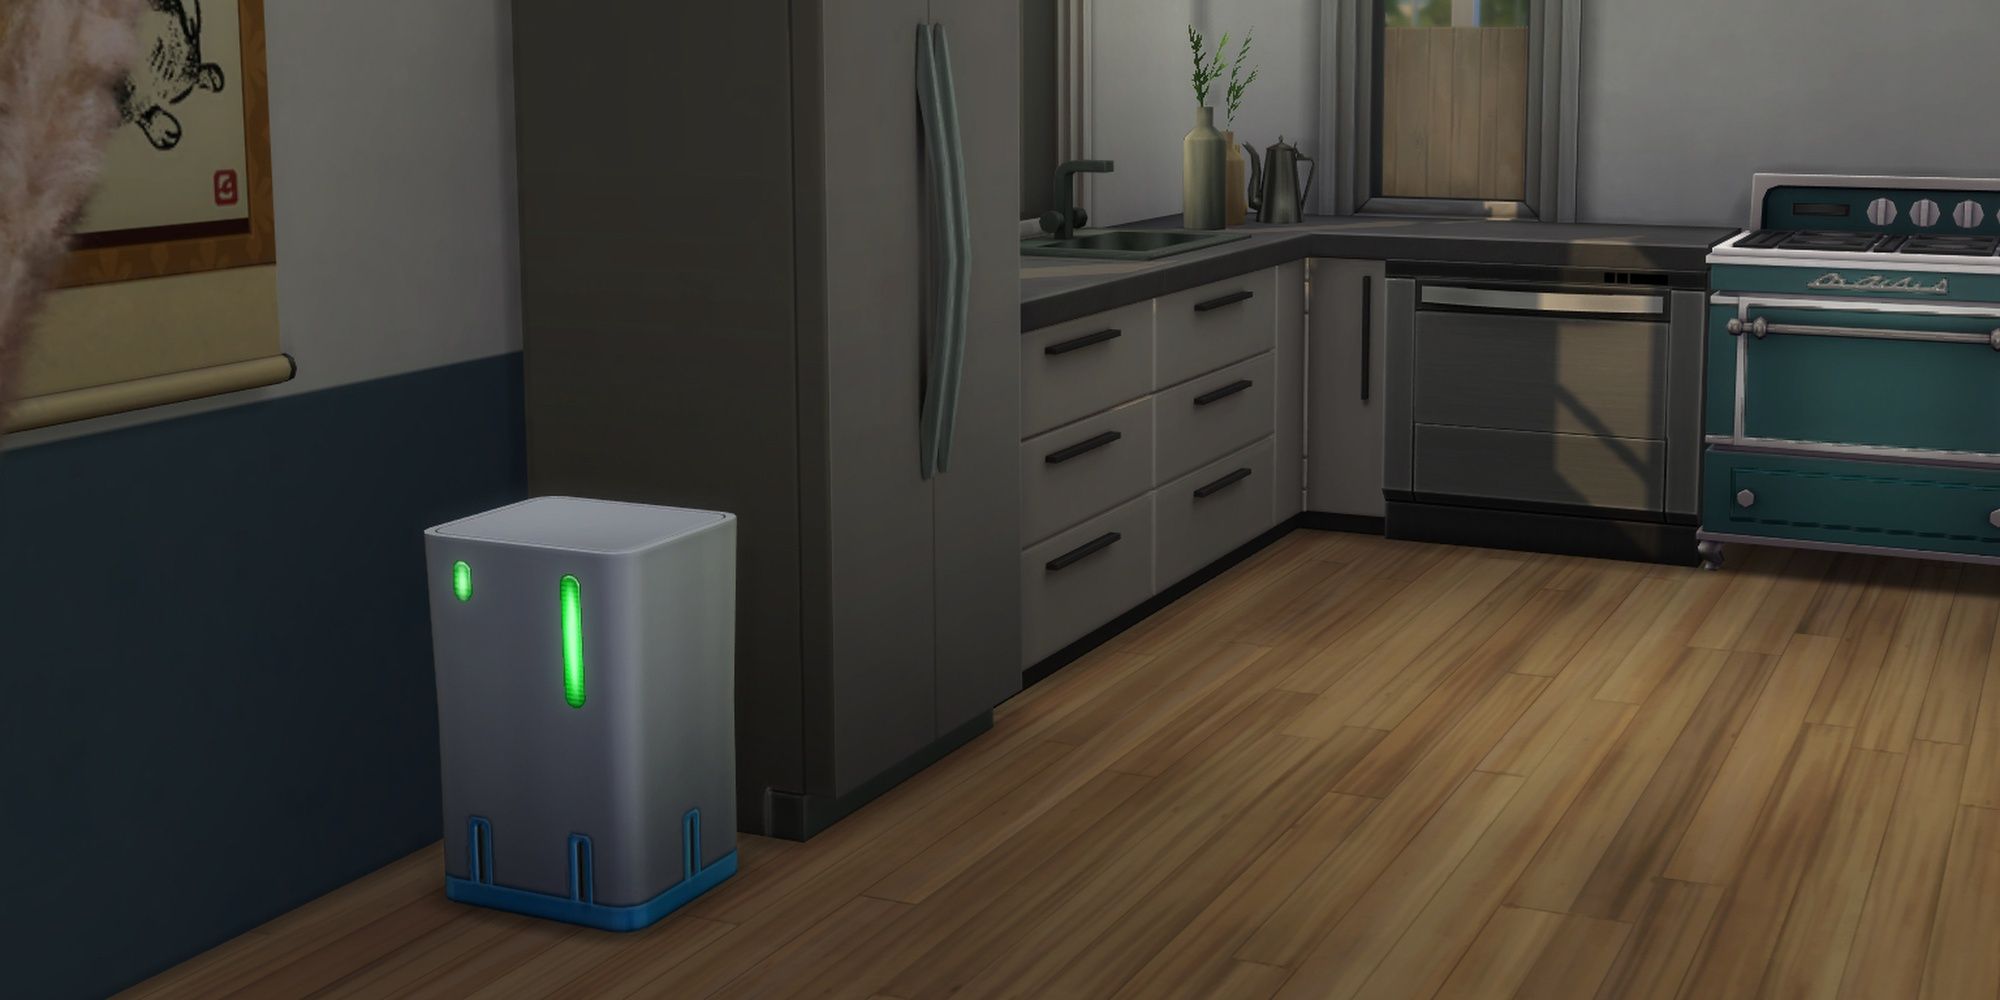 A small, futuristic looking trash can styled into a teal and gray kitchen in The Sims 4.